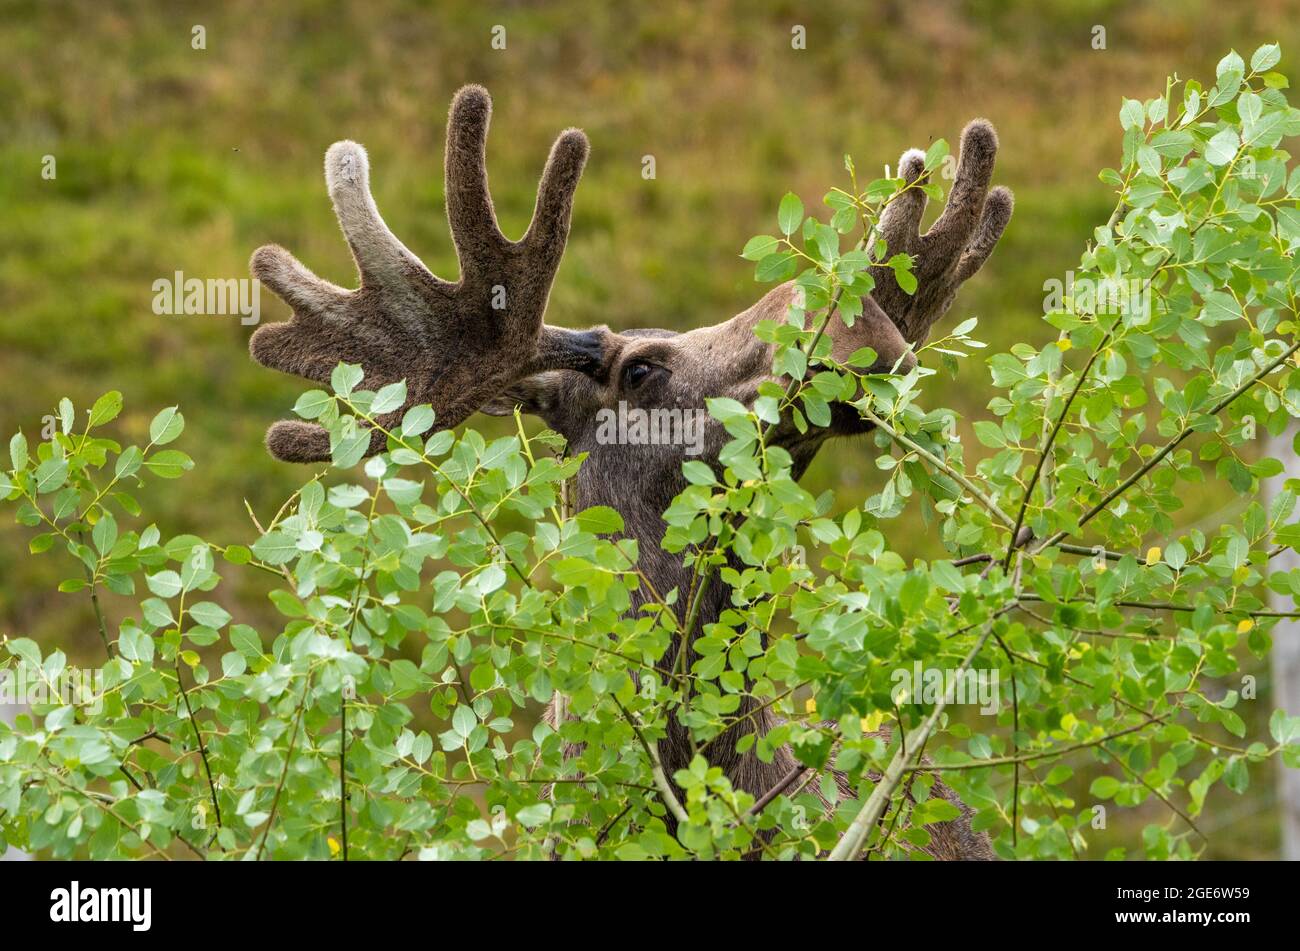 A European elk at Highland Wildlife Park and zoo near Kingussie, Highland, Scotland. The park is located within the Cairngorms National Park. Stock Photo